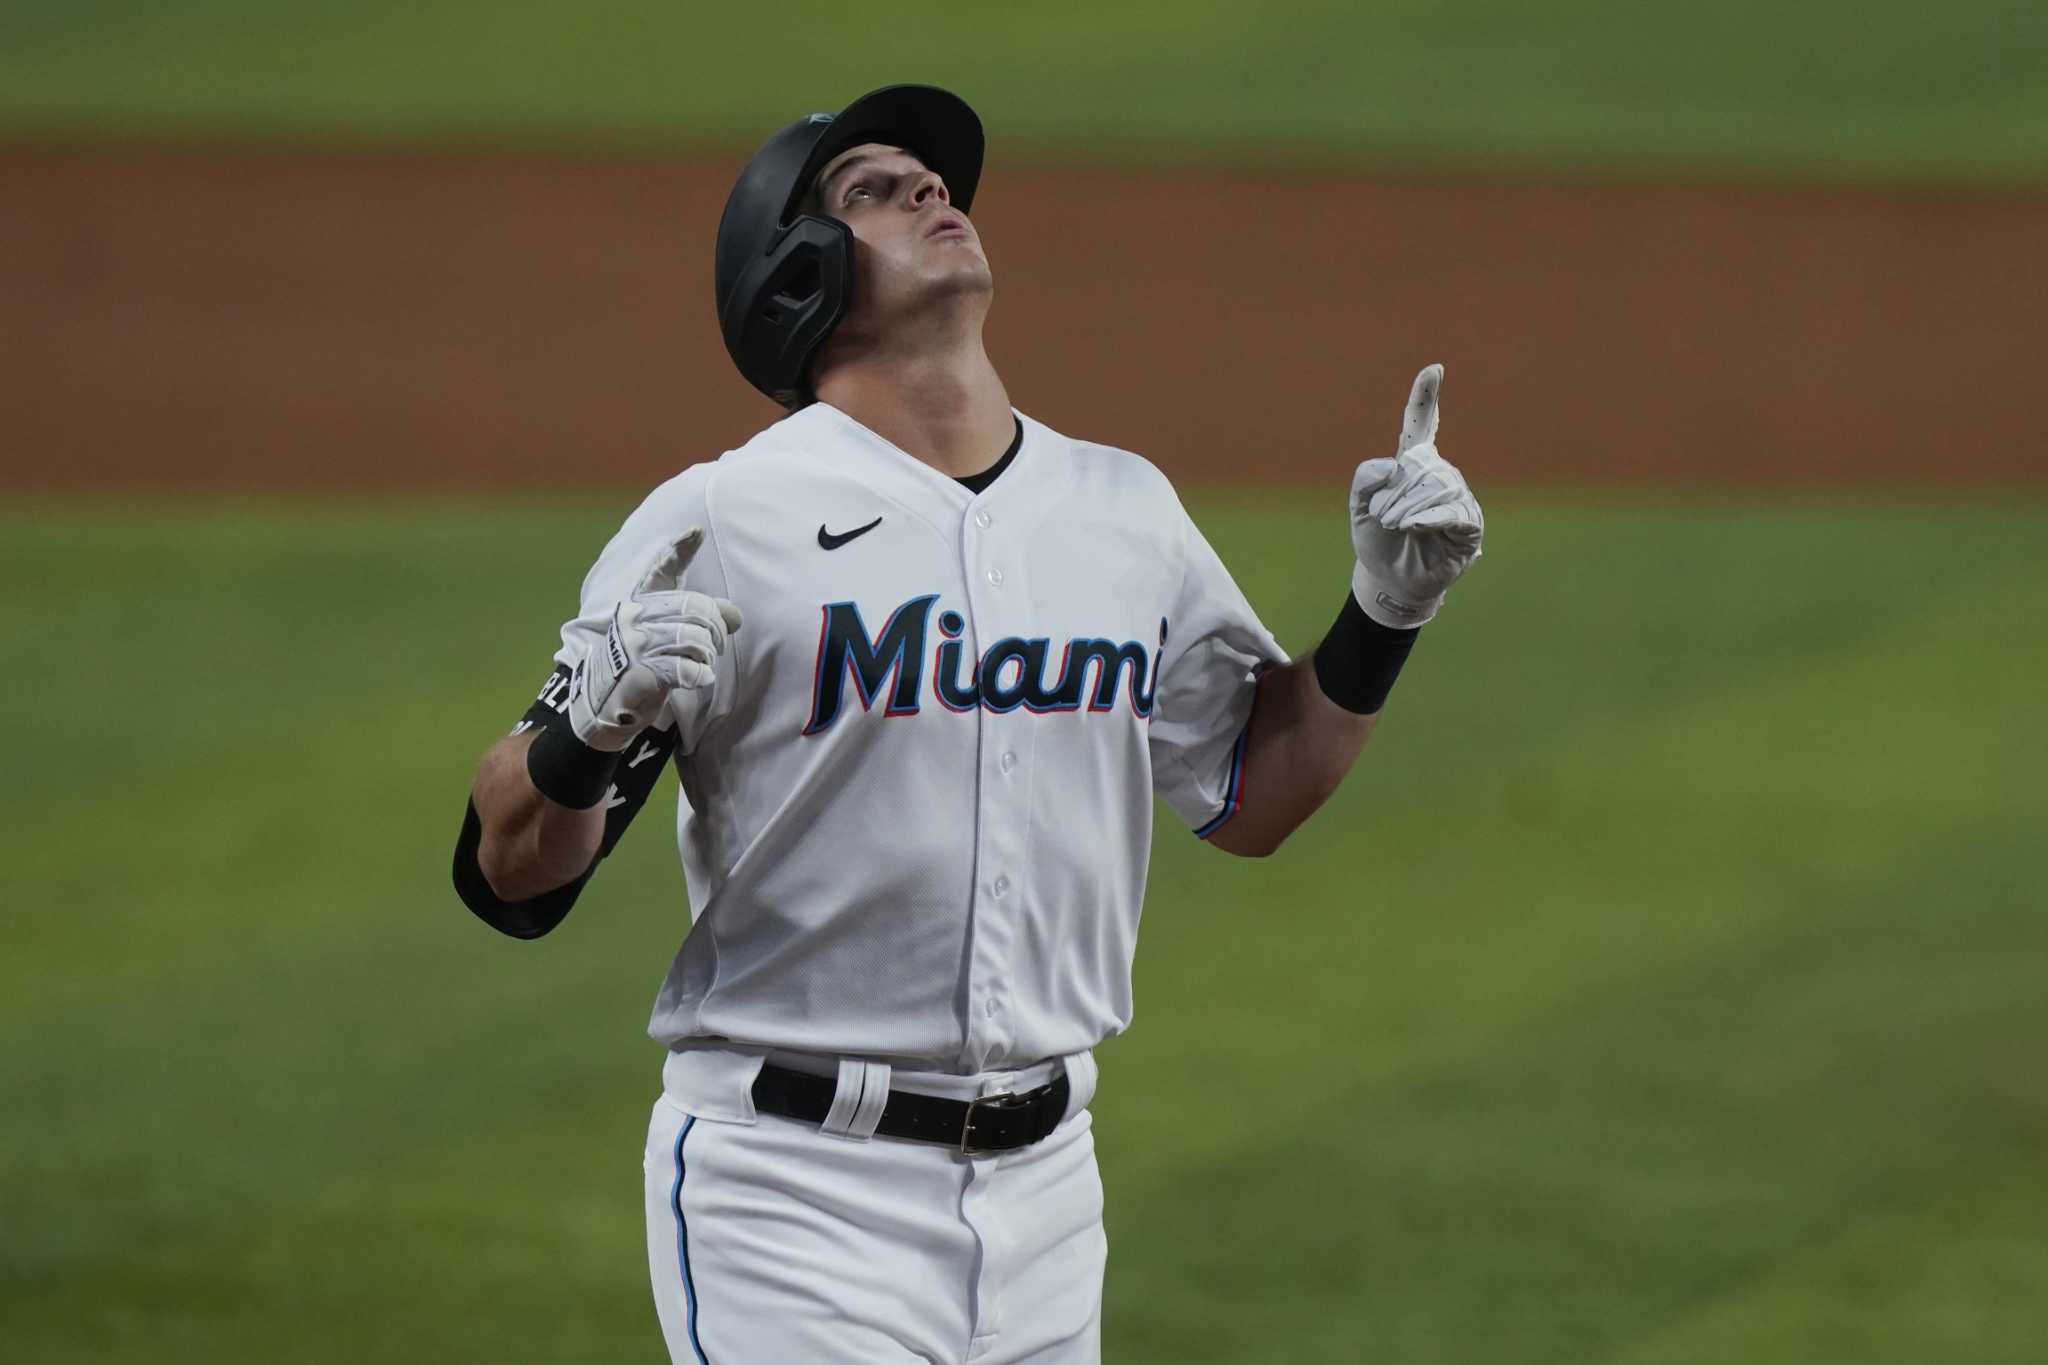 JJ Bleday hits first home run, Miami Marlins lose to Reds